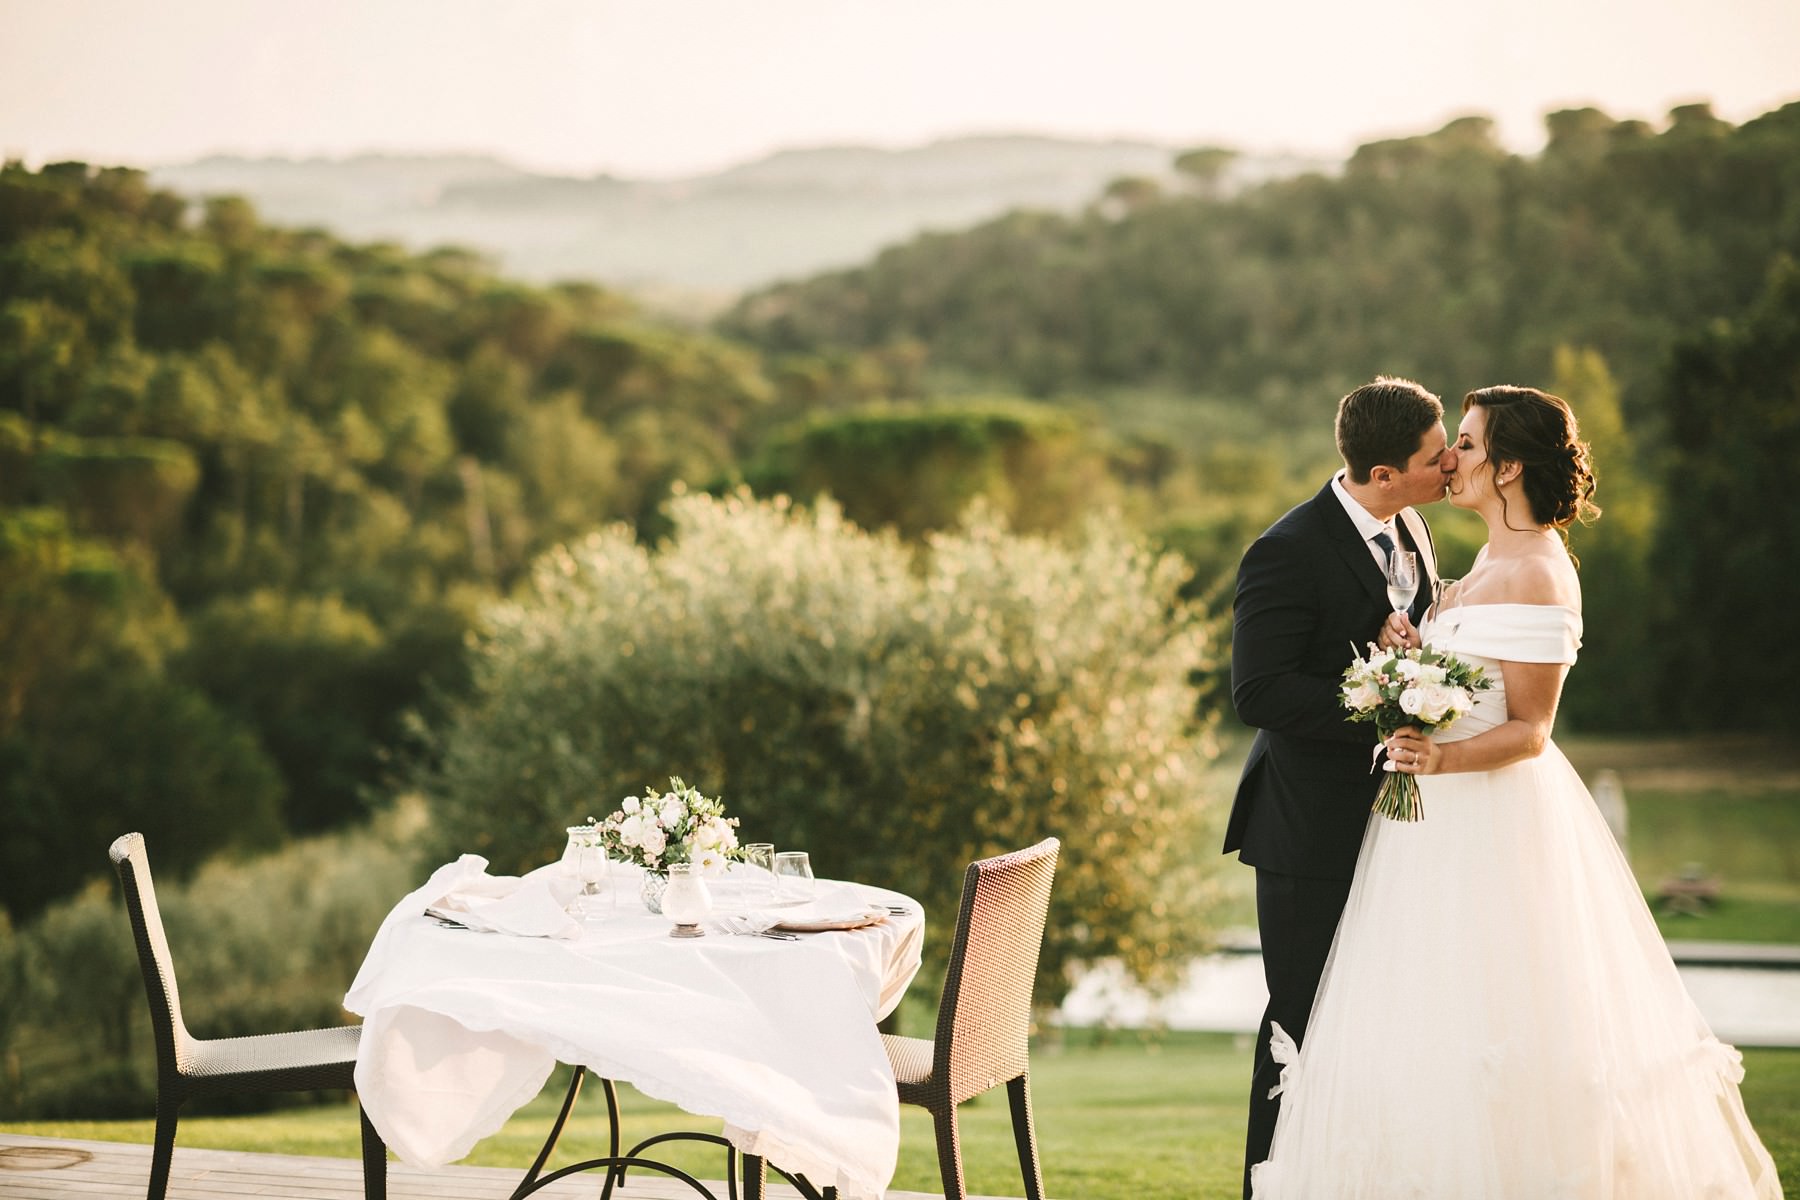 Dreamy couple portraits at the charming dinner setting. Elopement wedding in Tuscany countryside farmhouse Casetta